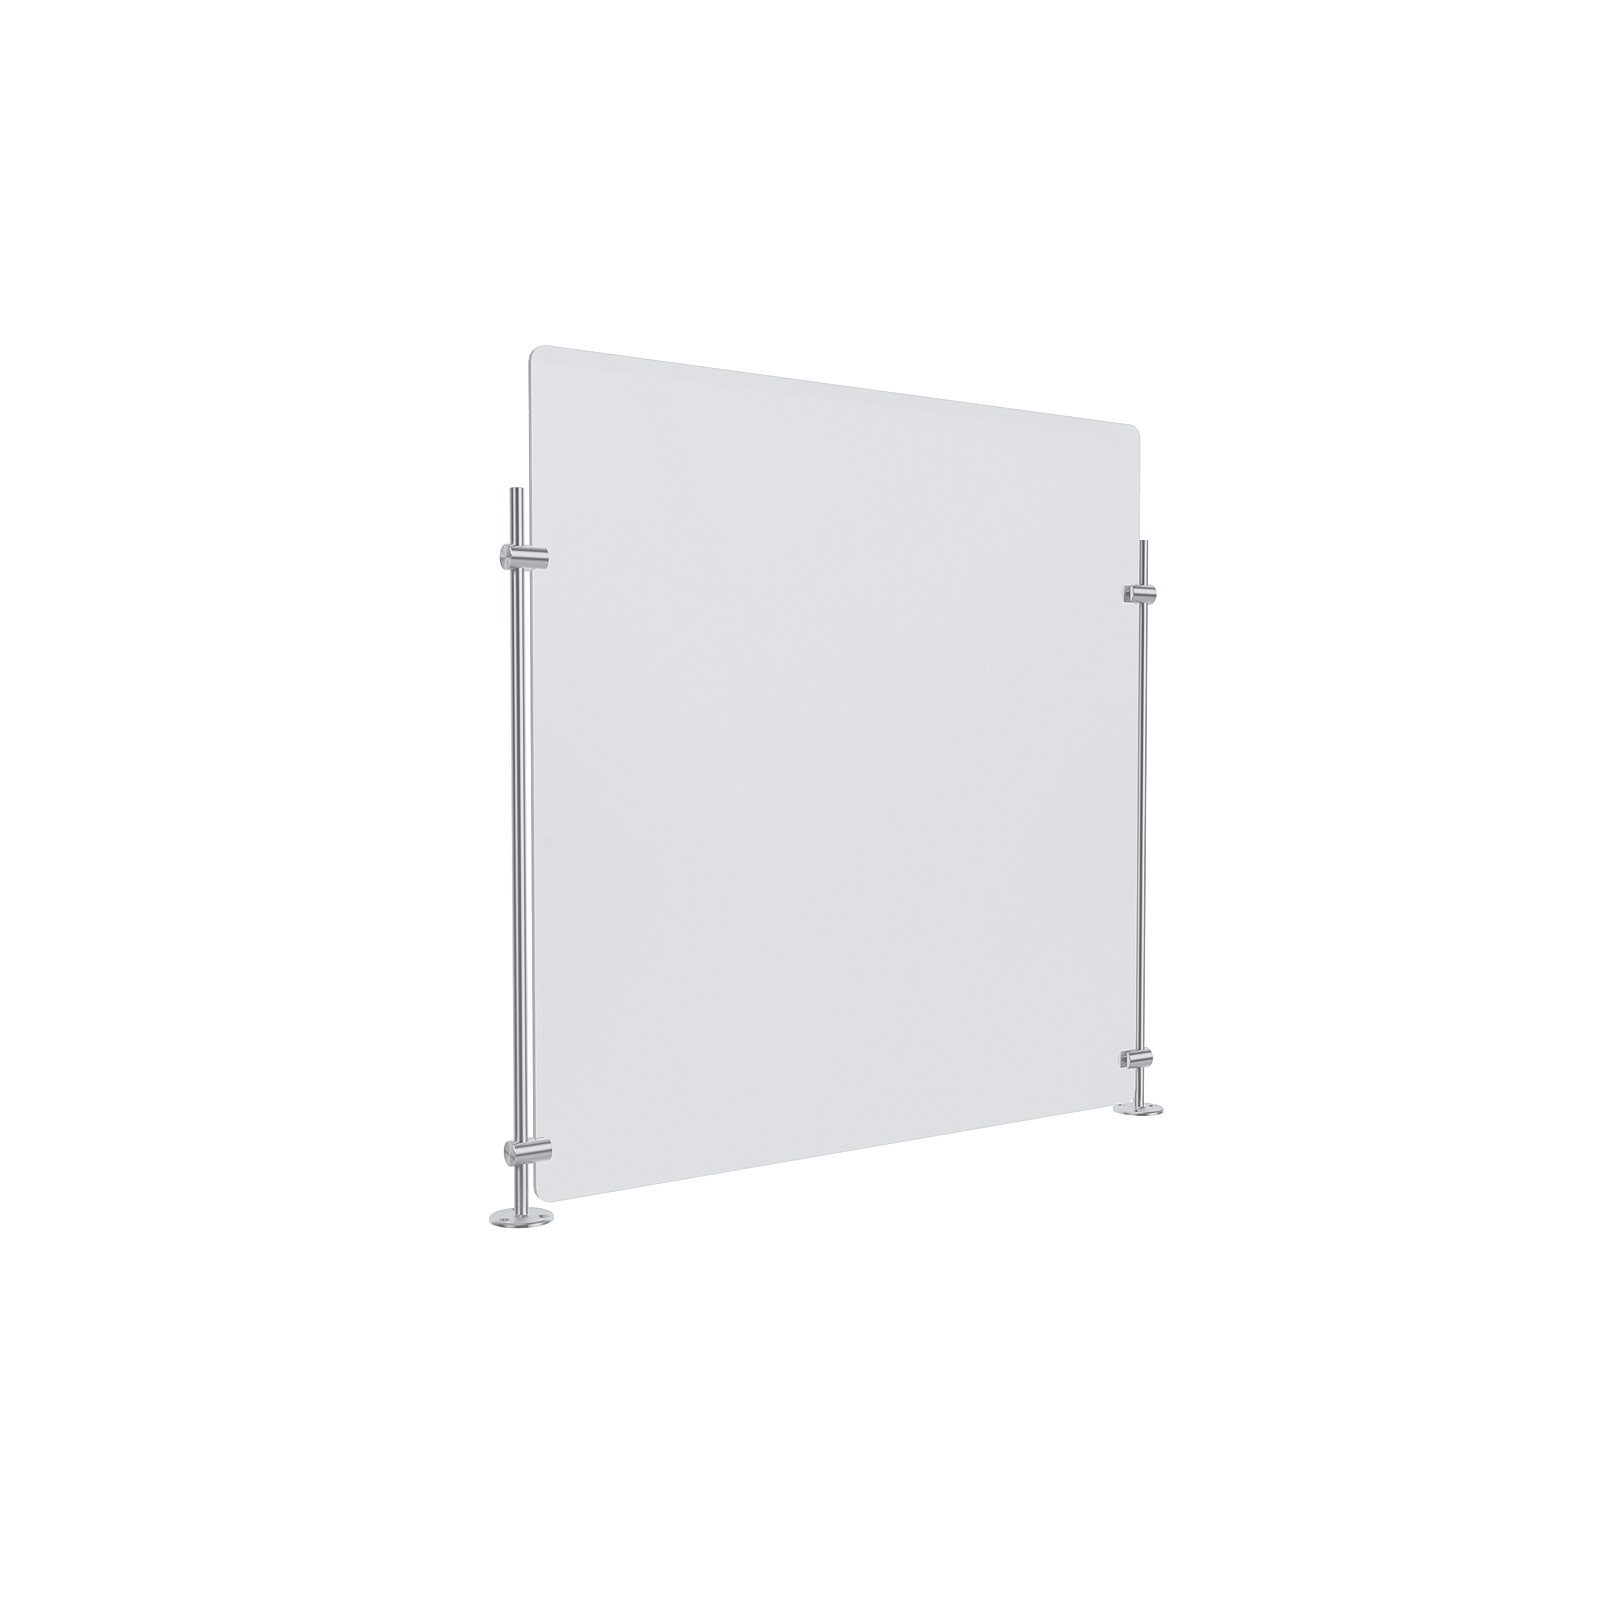 Clear Acrylic Sneeze Guard 23-1/2'' Wide x 23-1/2'' Tall, with (2) 20'' Tall x 3/8'' Diameter Clear Anodized Aluminum Rods on the Side